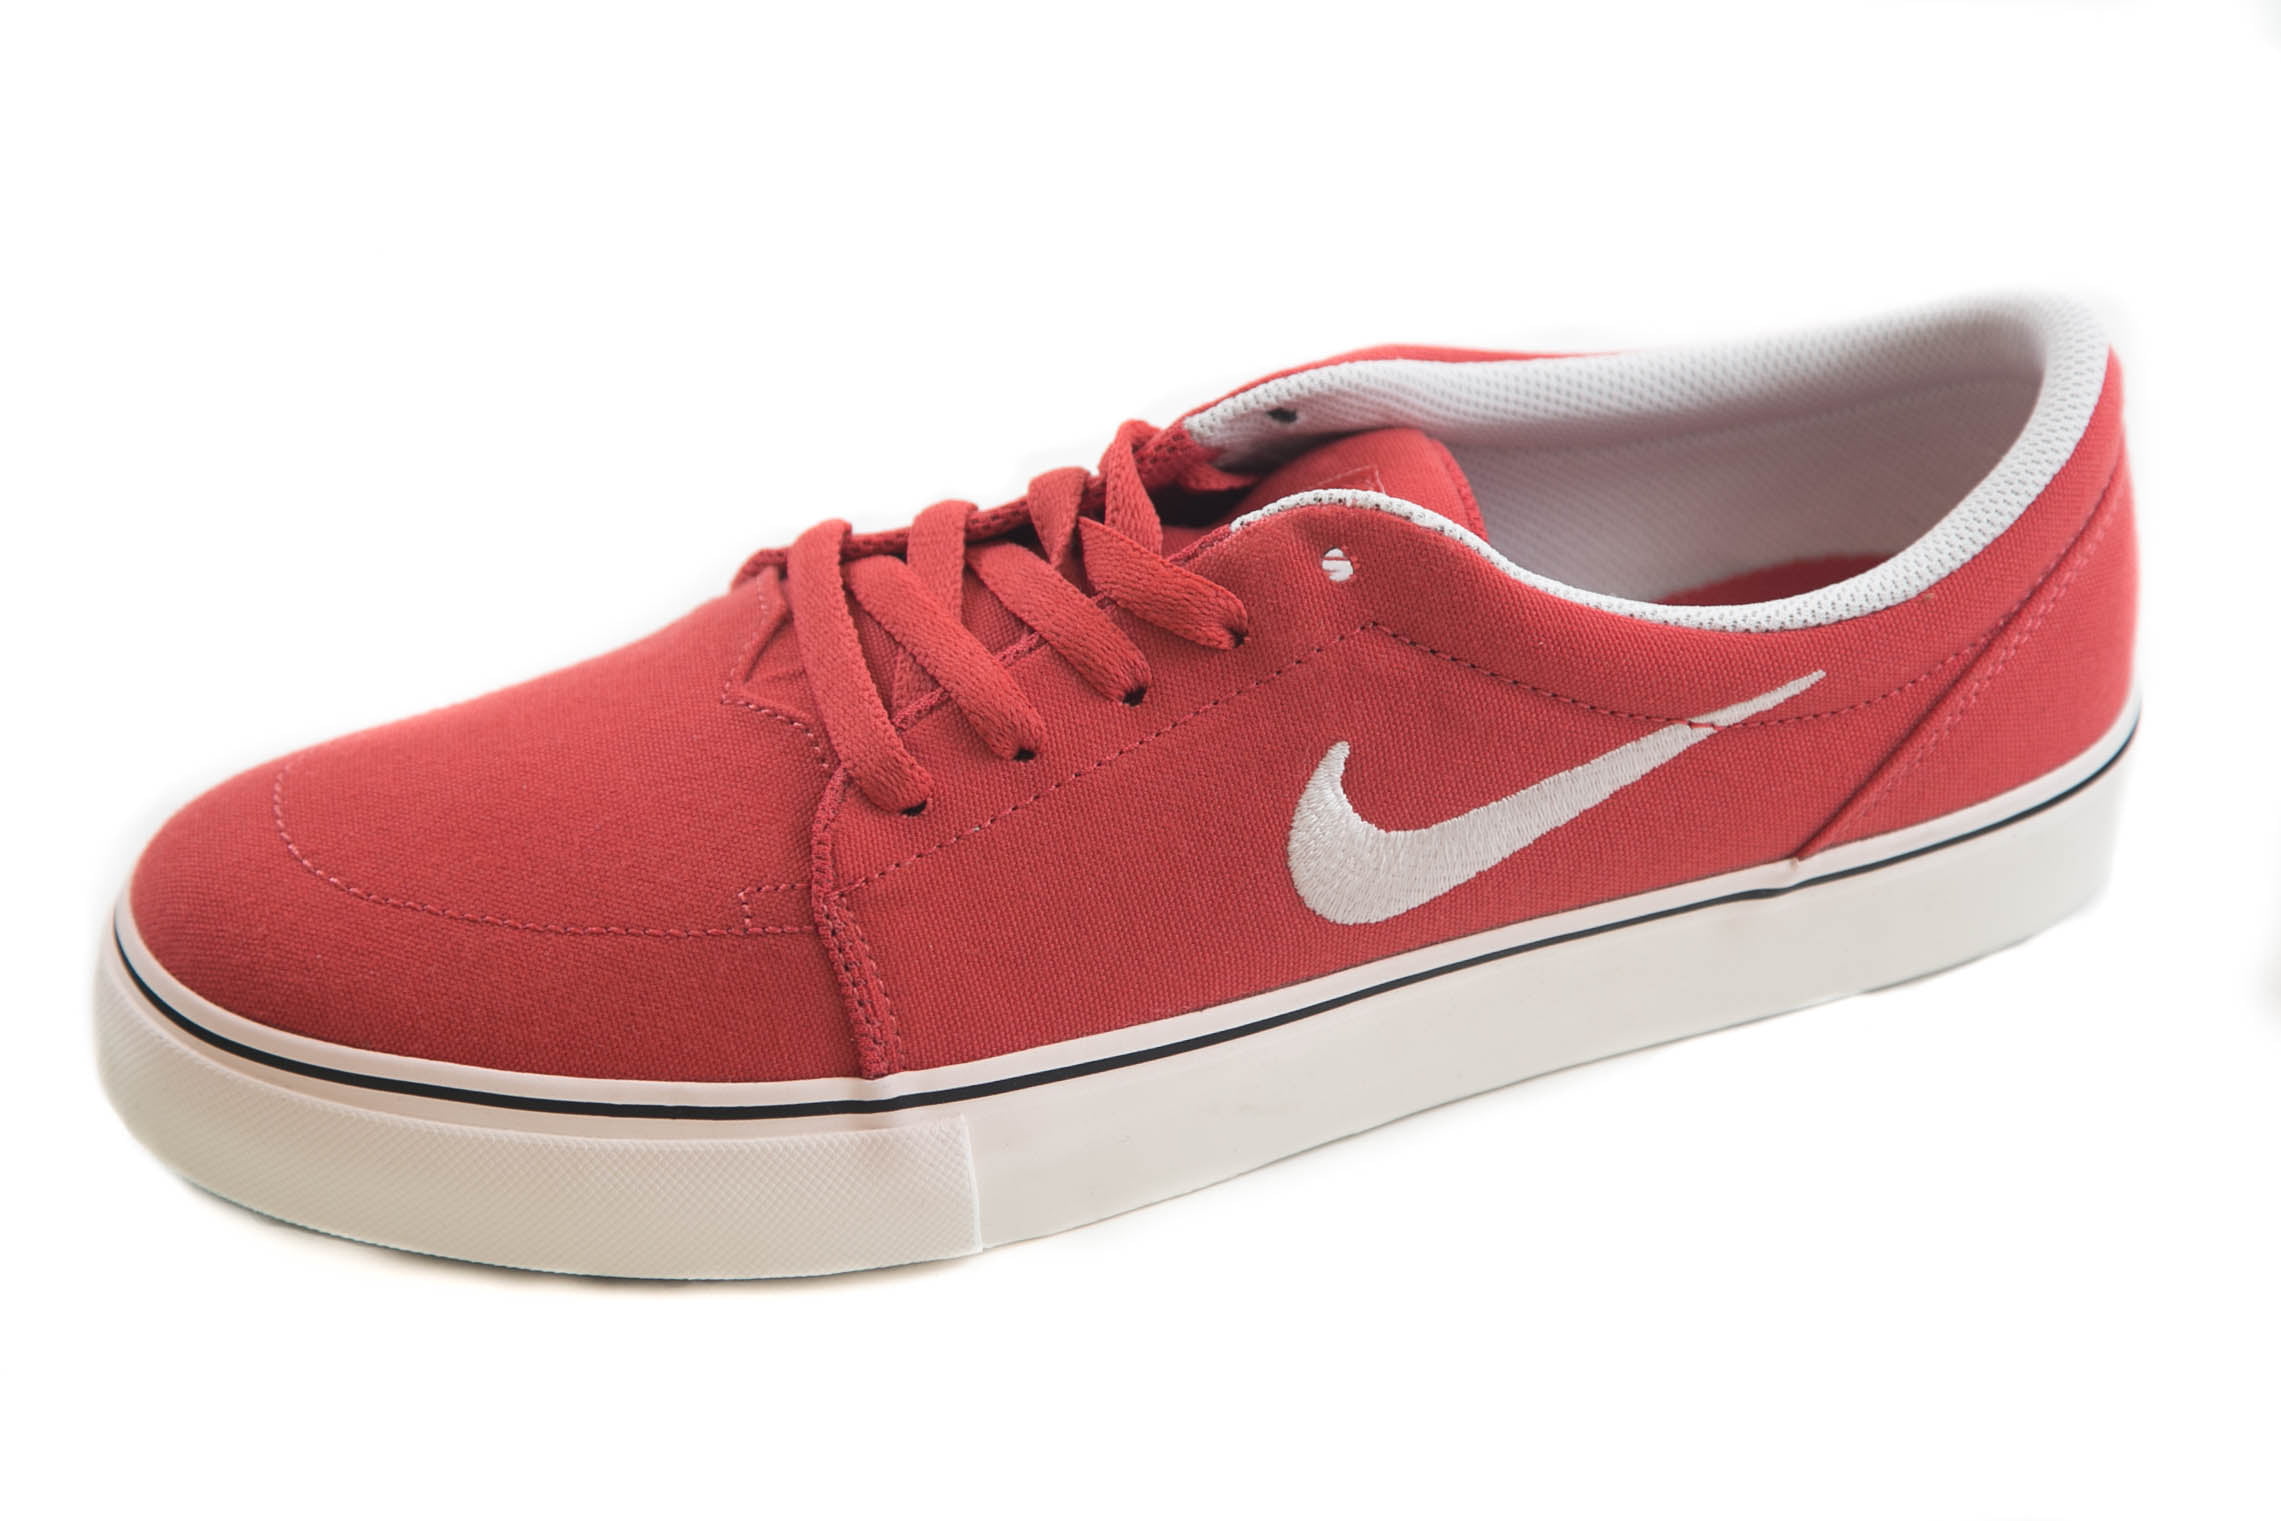 Nike Men's Satire Canvas Shoes Red Clay Ivory - Walmart.com